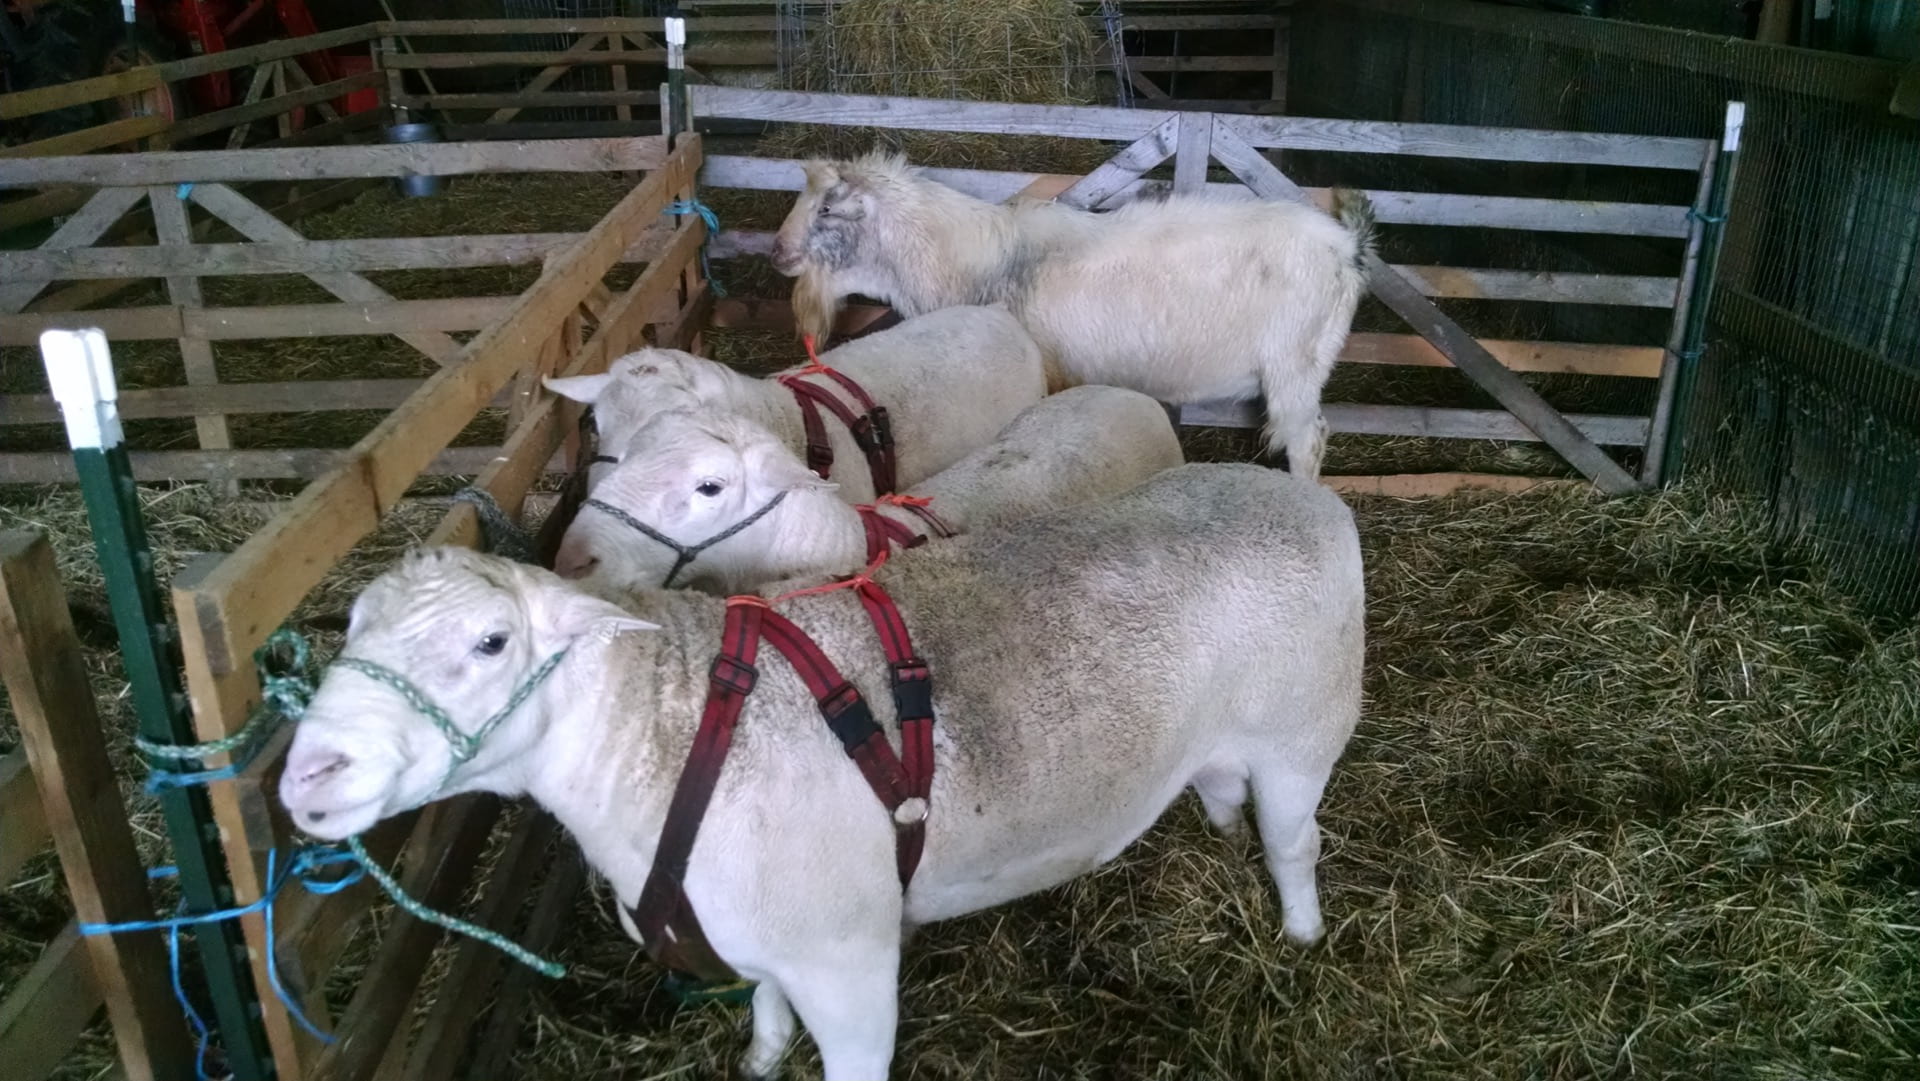 Several sheep stand in a pen with harnesses on.